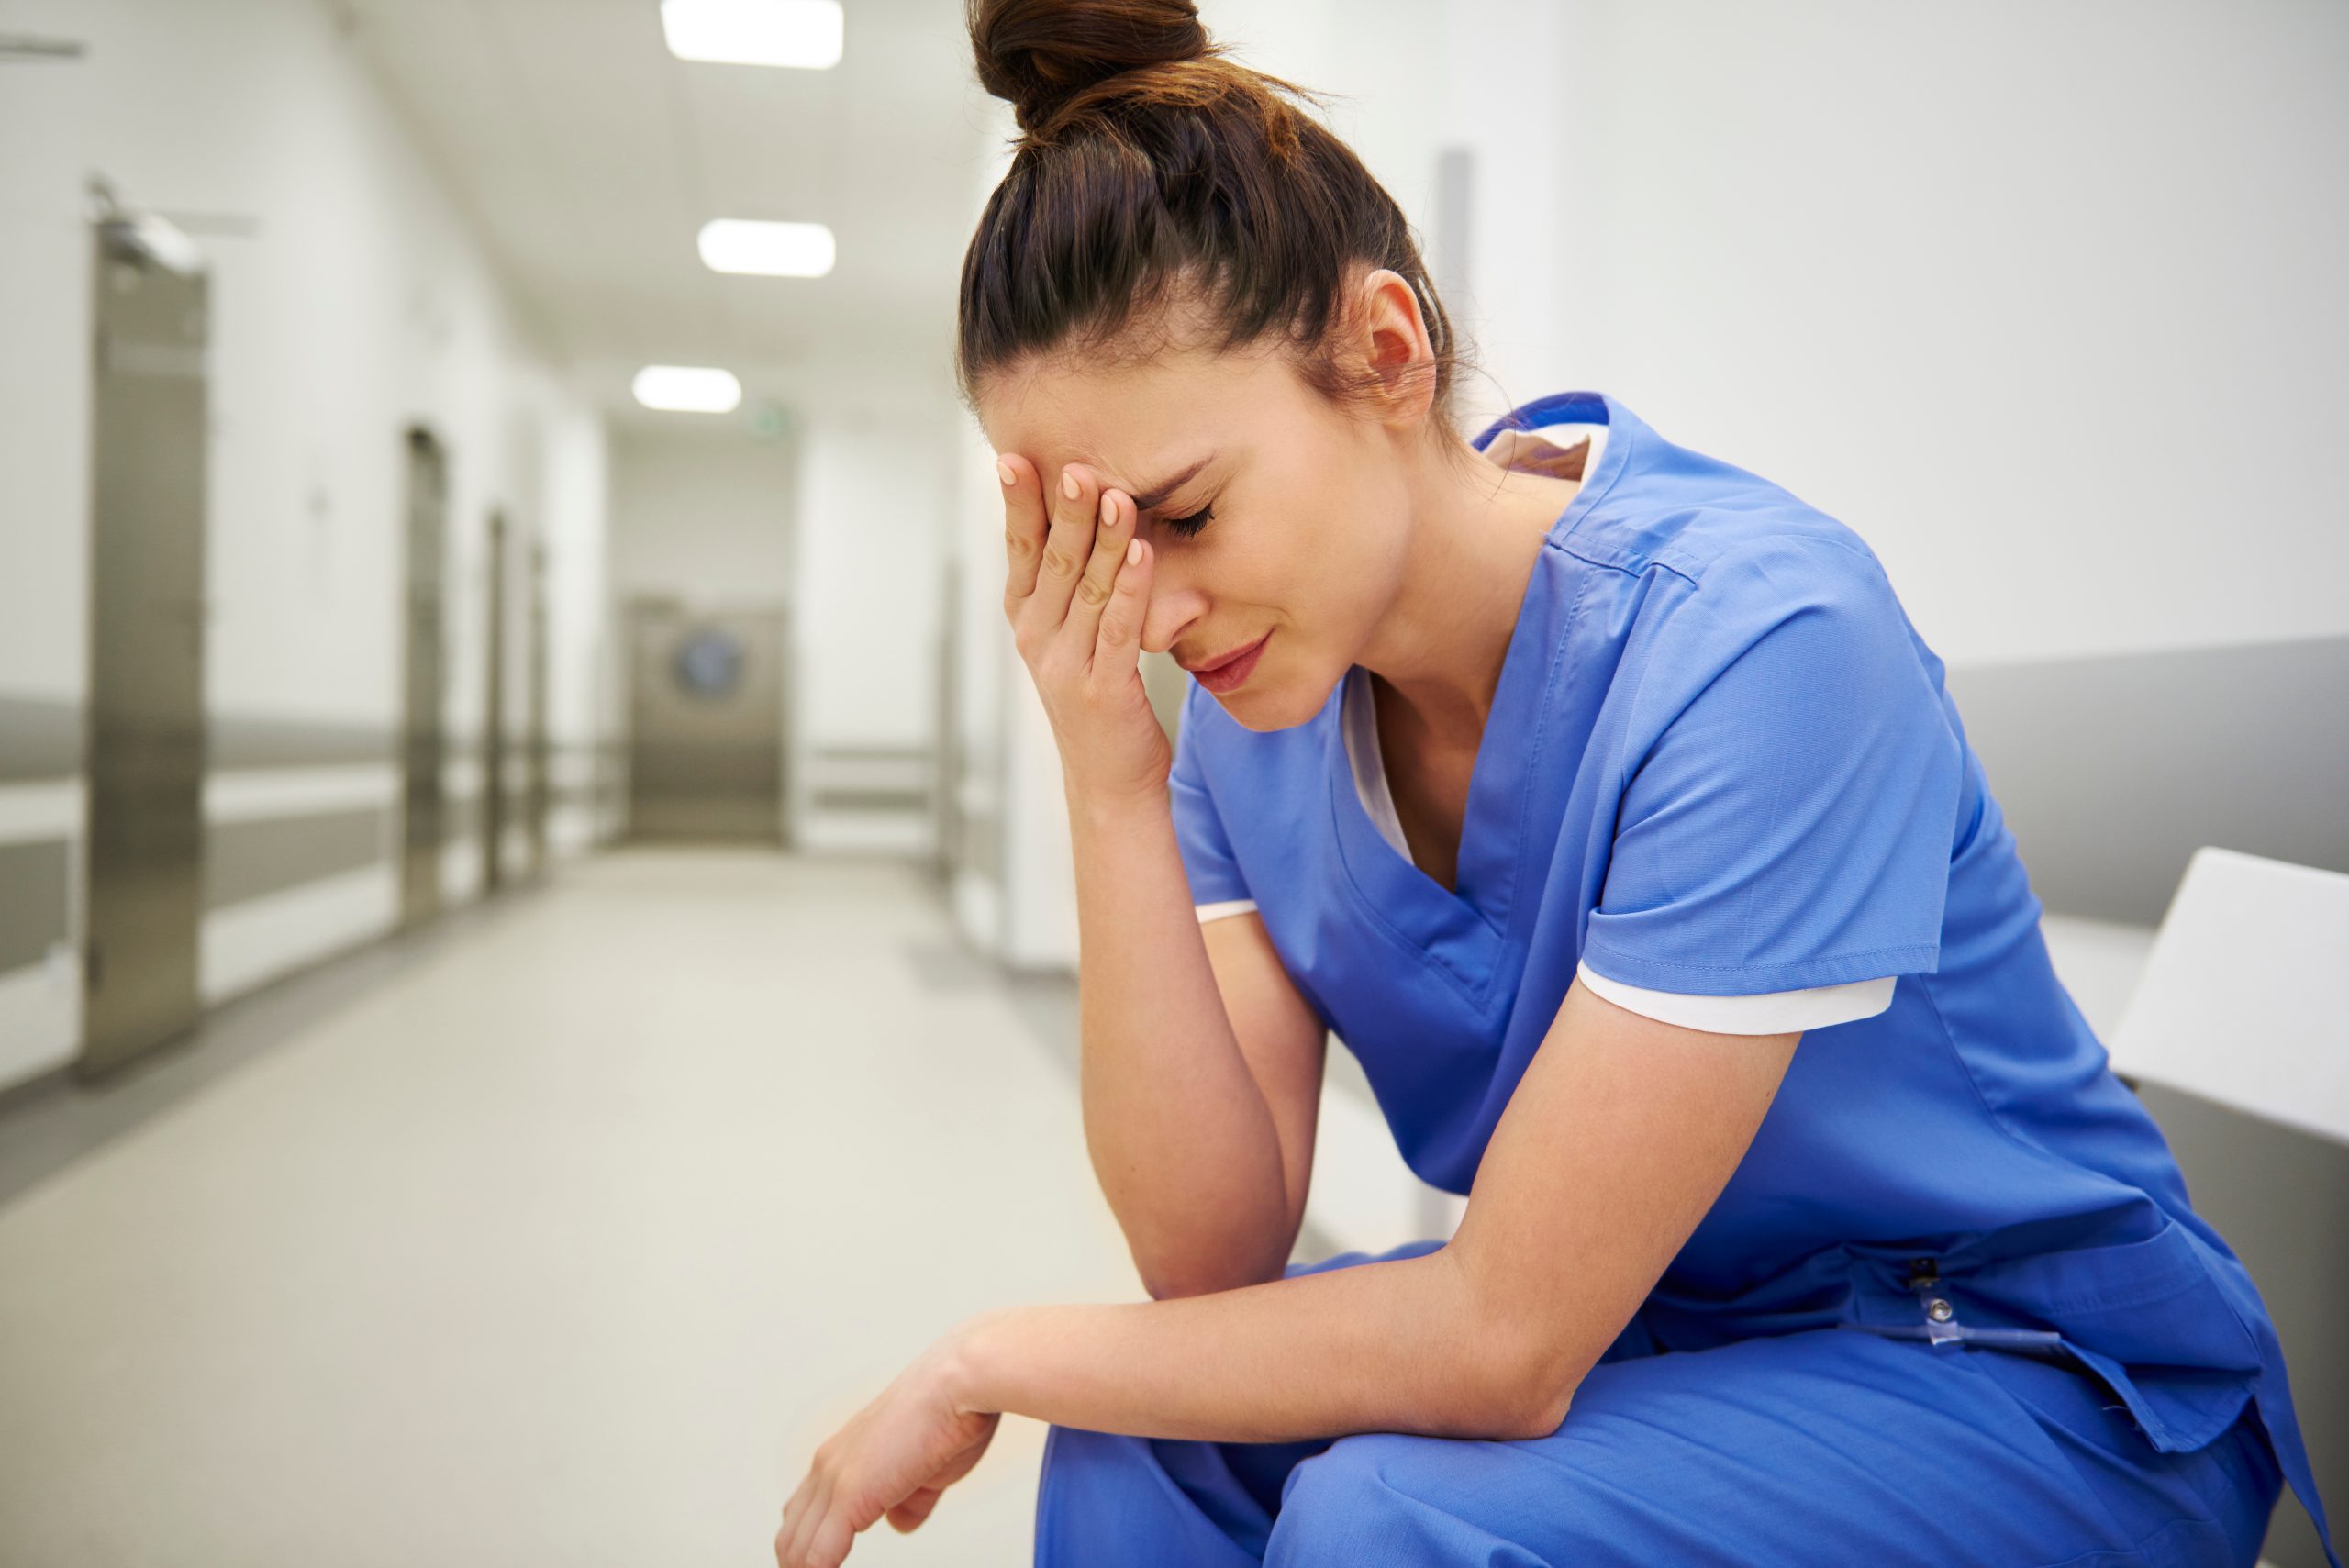 Vet nurses tell of workplace bullying and stresses